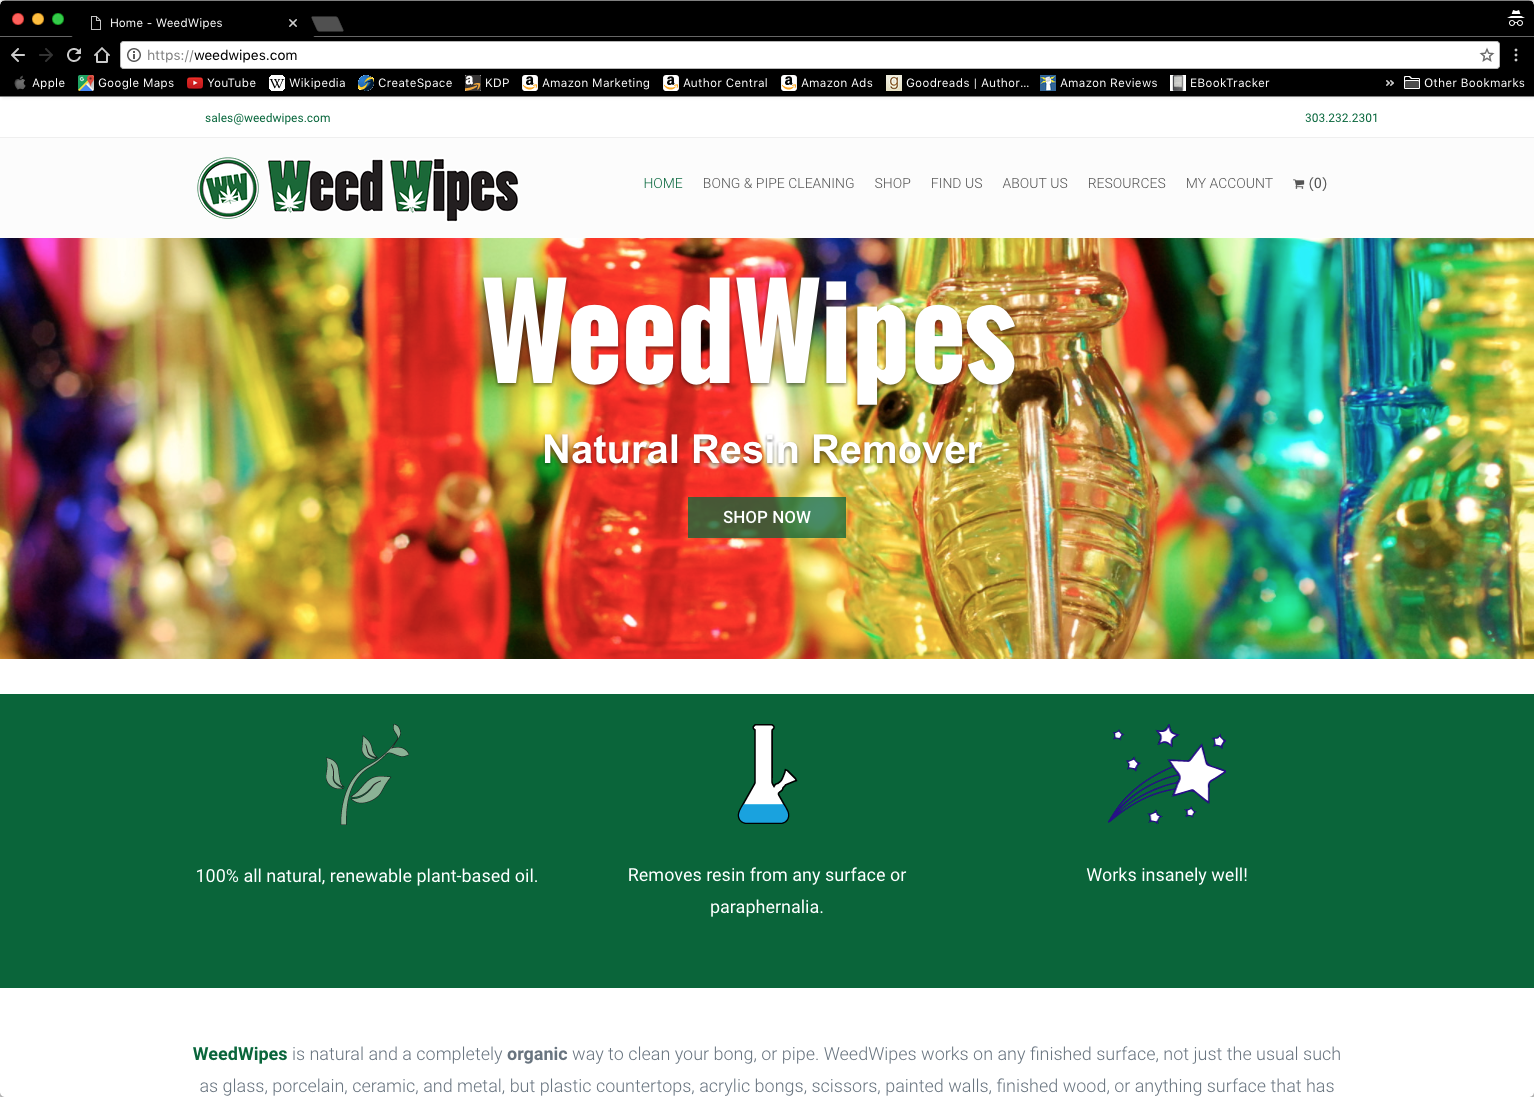 Spider Trainers' gallery: weedwipes.com (image)